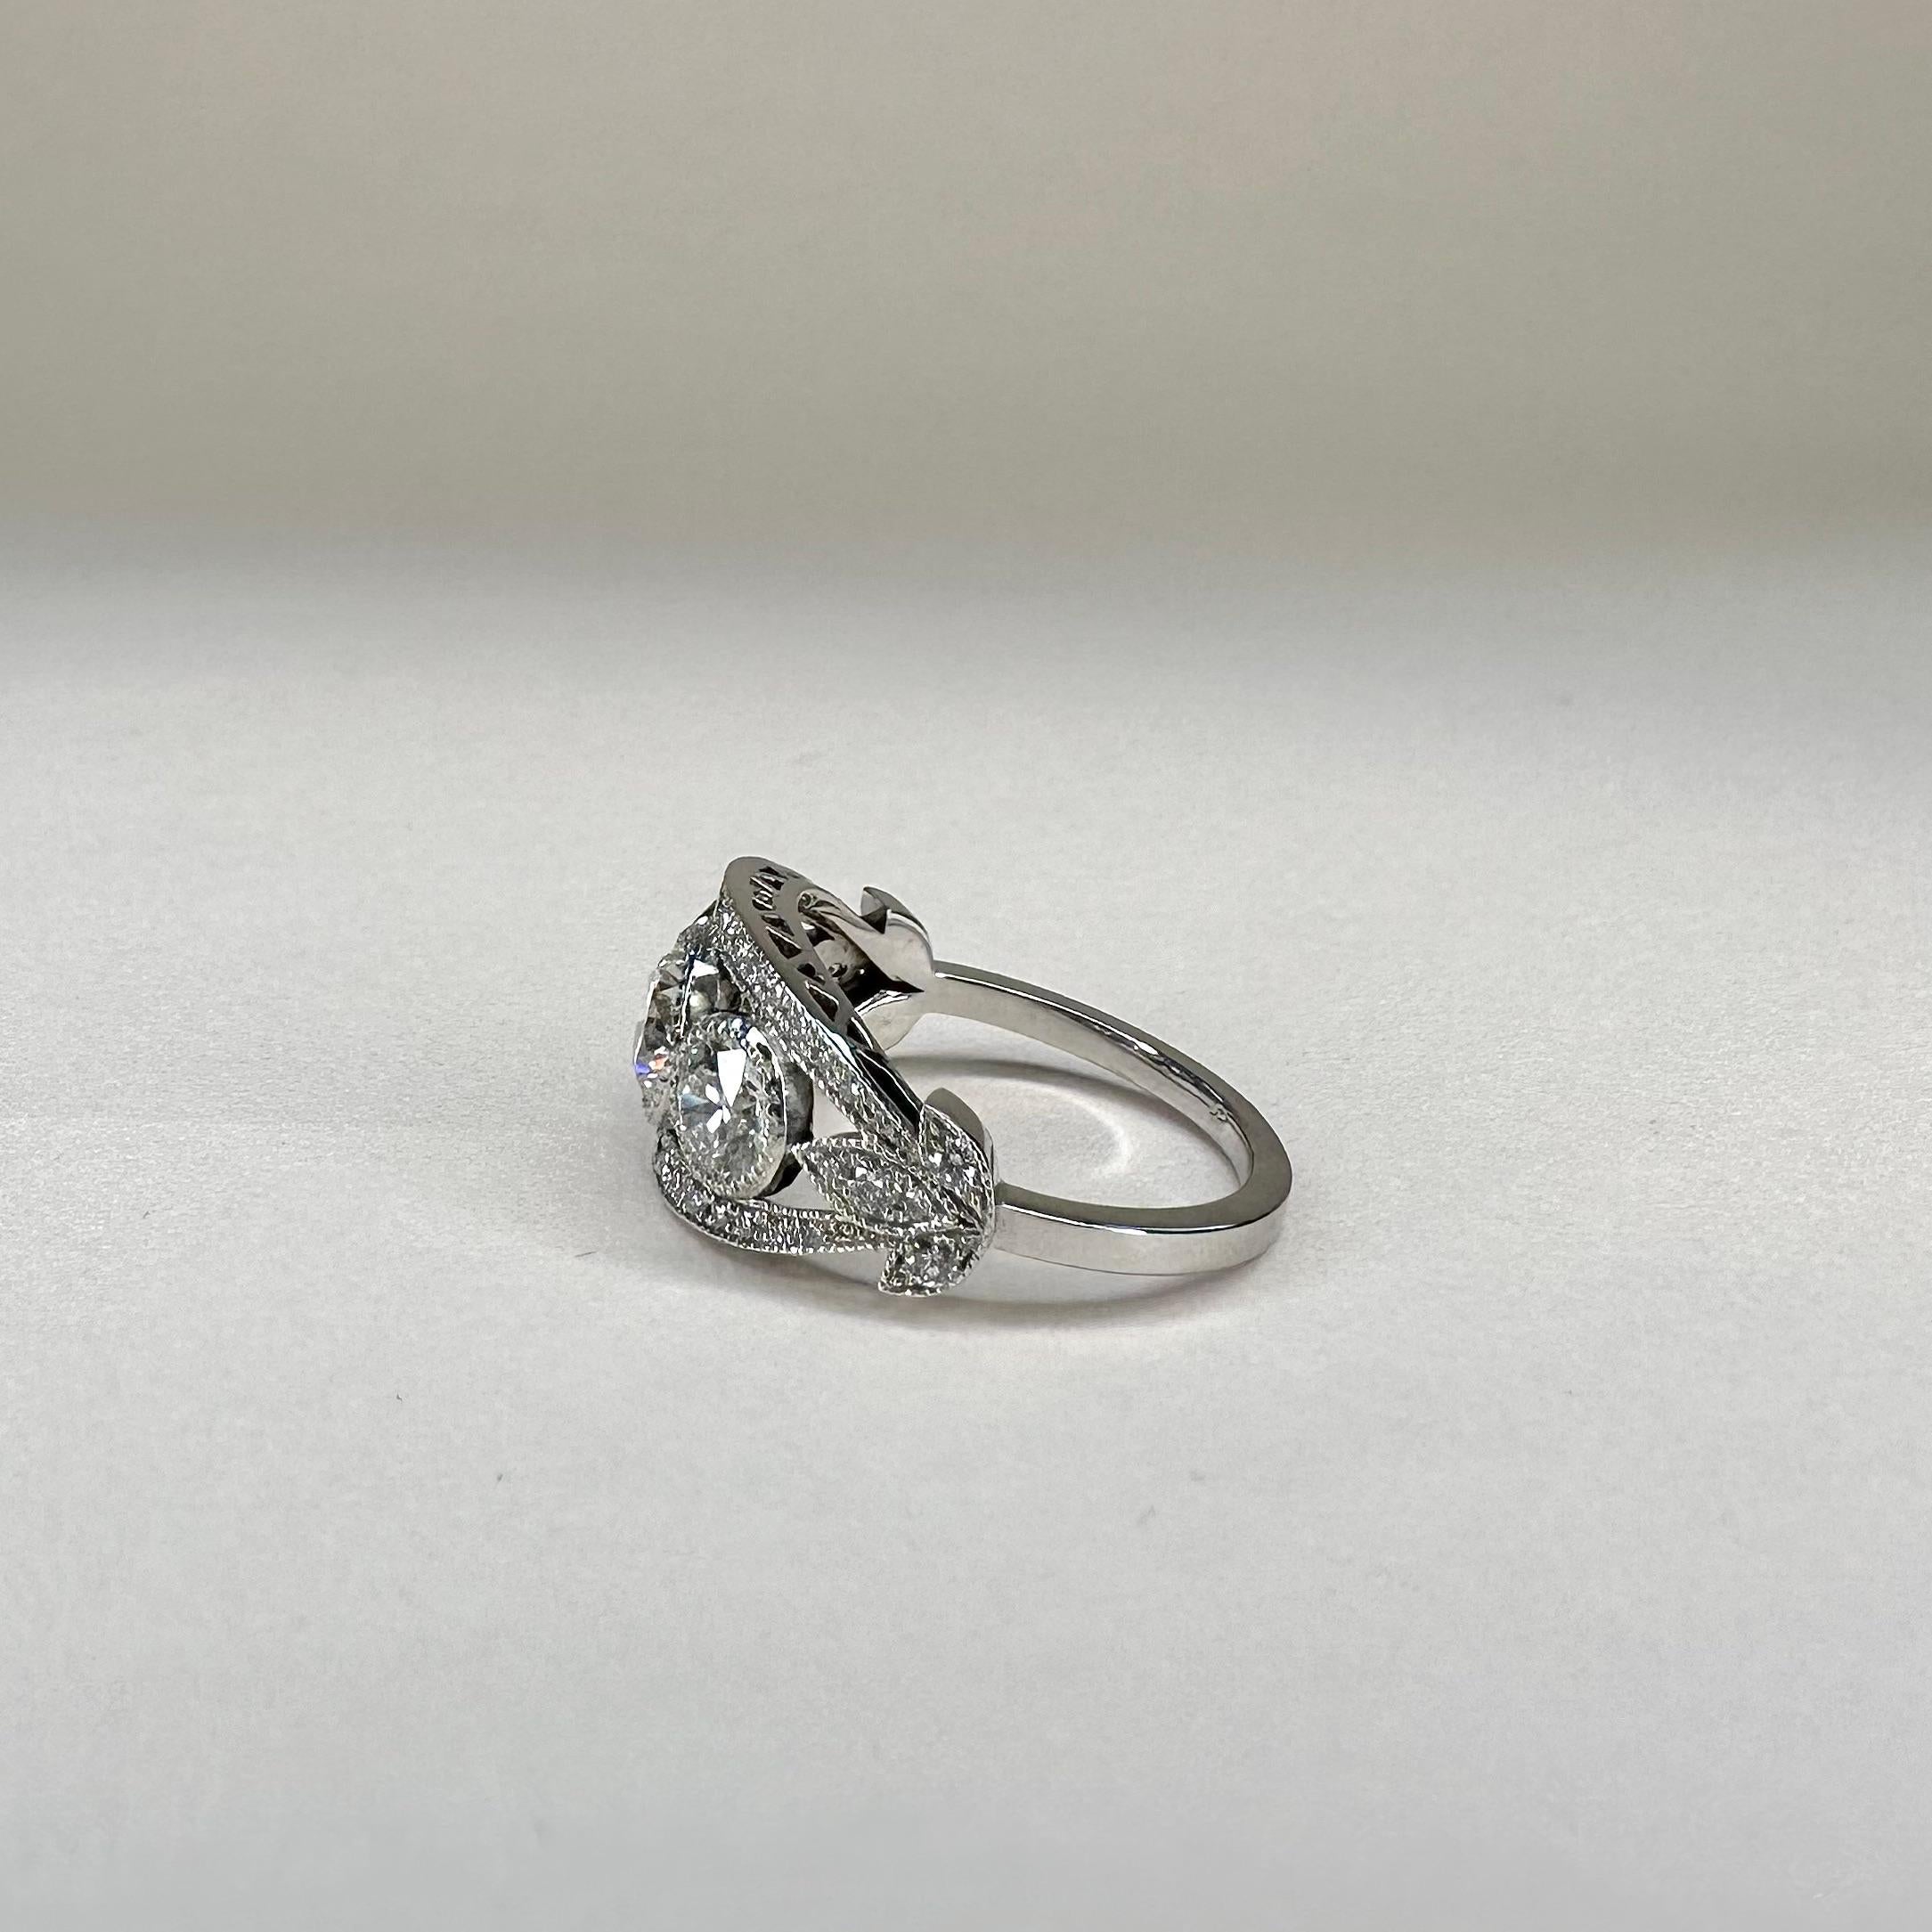 For Sale:  18k White Gold 3 Stone Diamond Ring With a 0.70 Ct And 2x 0.35 Cts Brilliant Cut 4